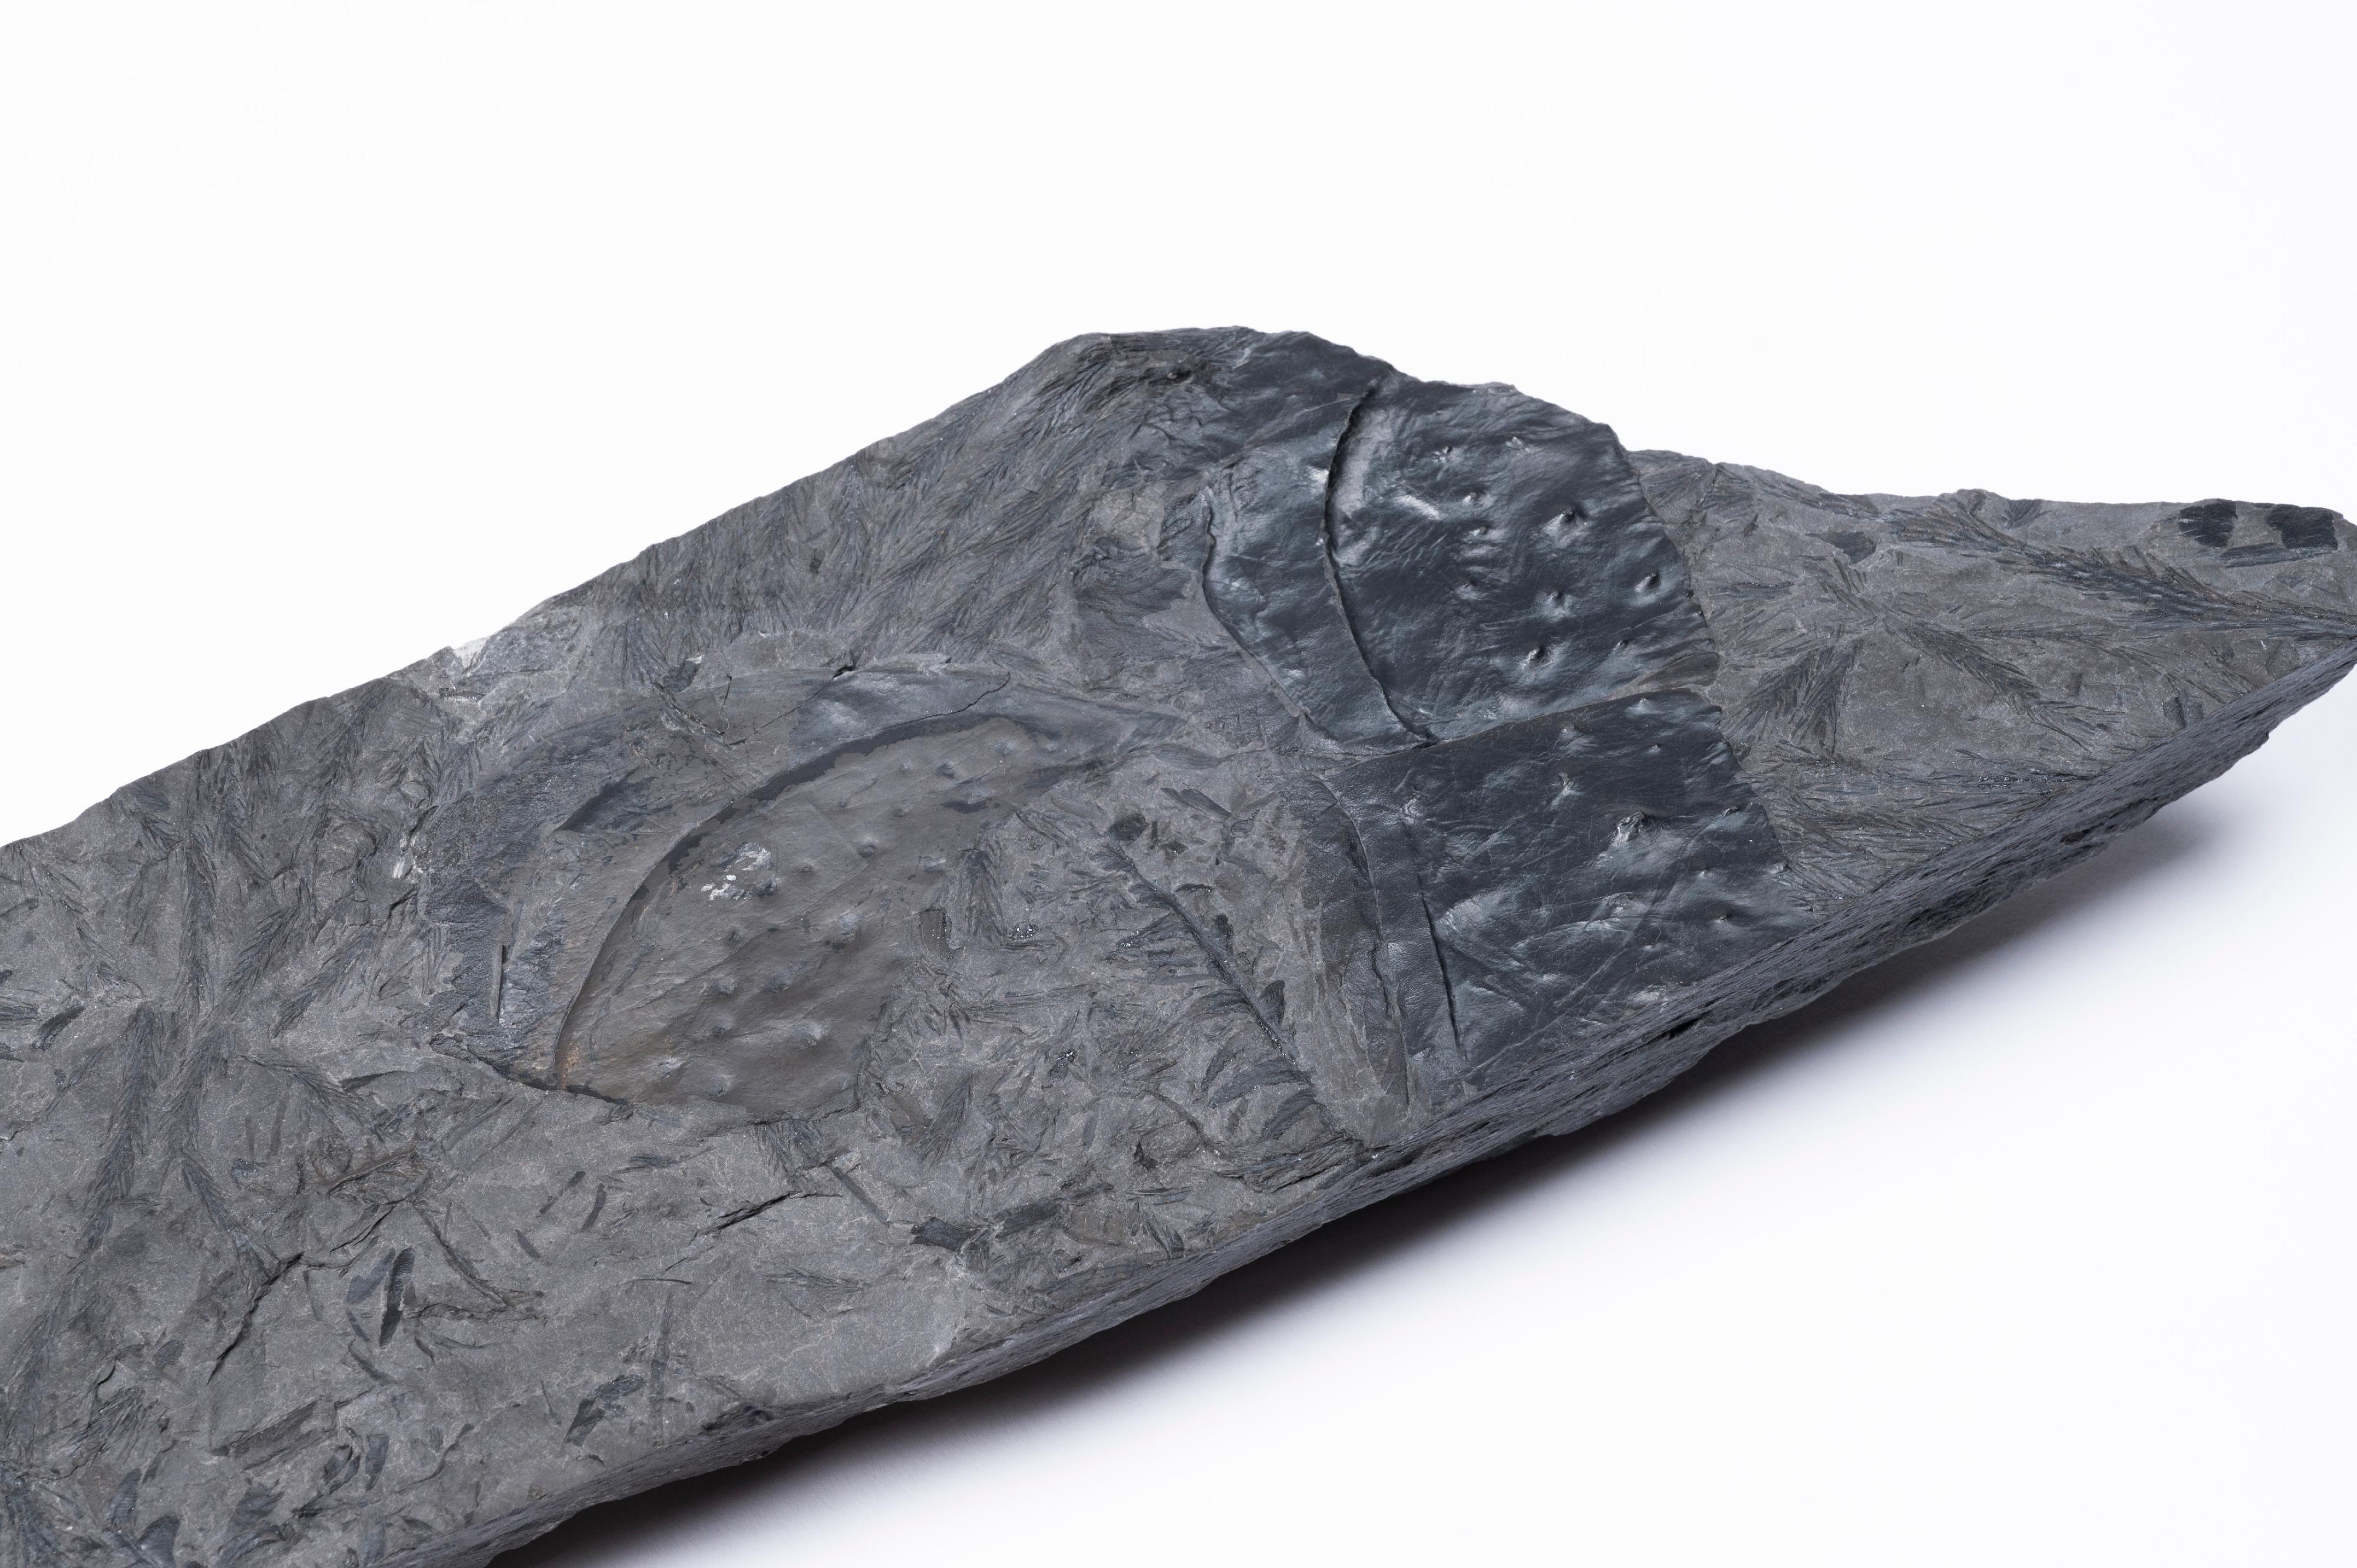 Part of the permanent exhibition "Extinction·Resilience" at the Palaeontology Gallery at the Hong Kong Science Museum will be temporarily closed from April 6 (Saturday) to the end of April for renewal of exhibits. Photo shows a dorsal exoskeleton fossil of Arthropleura, the largest land-dwelling arthropods in history, which existed 300 million years ago. It will be displayed after the renewal of exhibits.